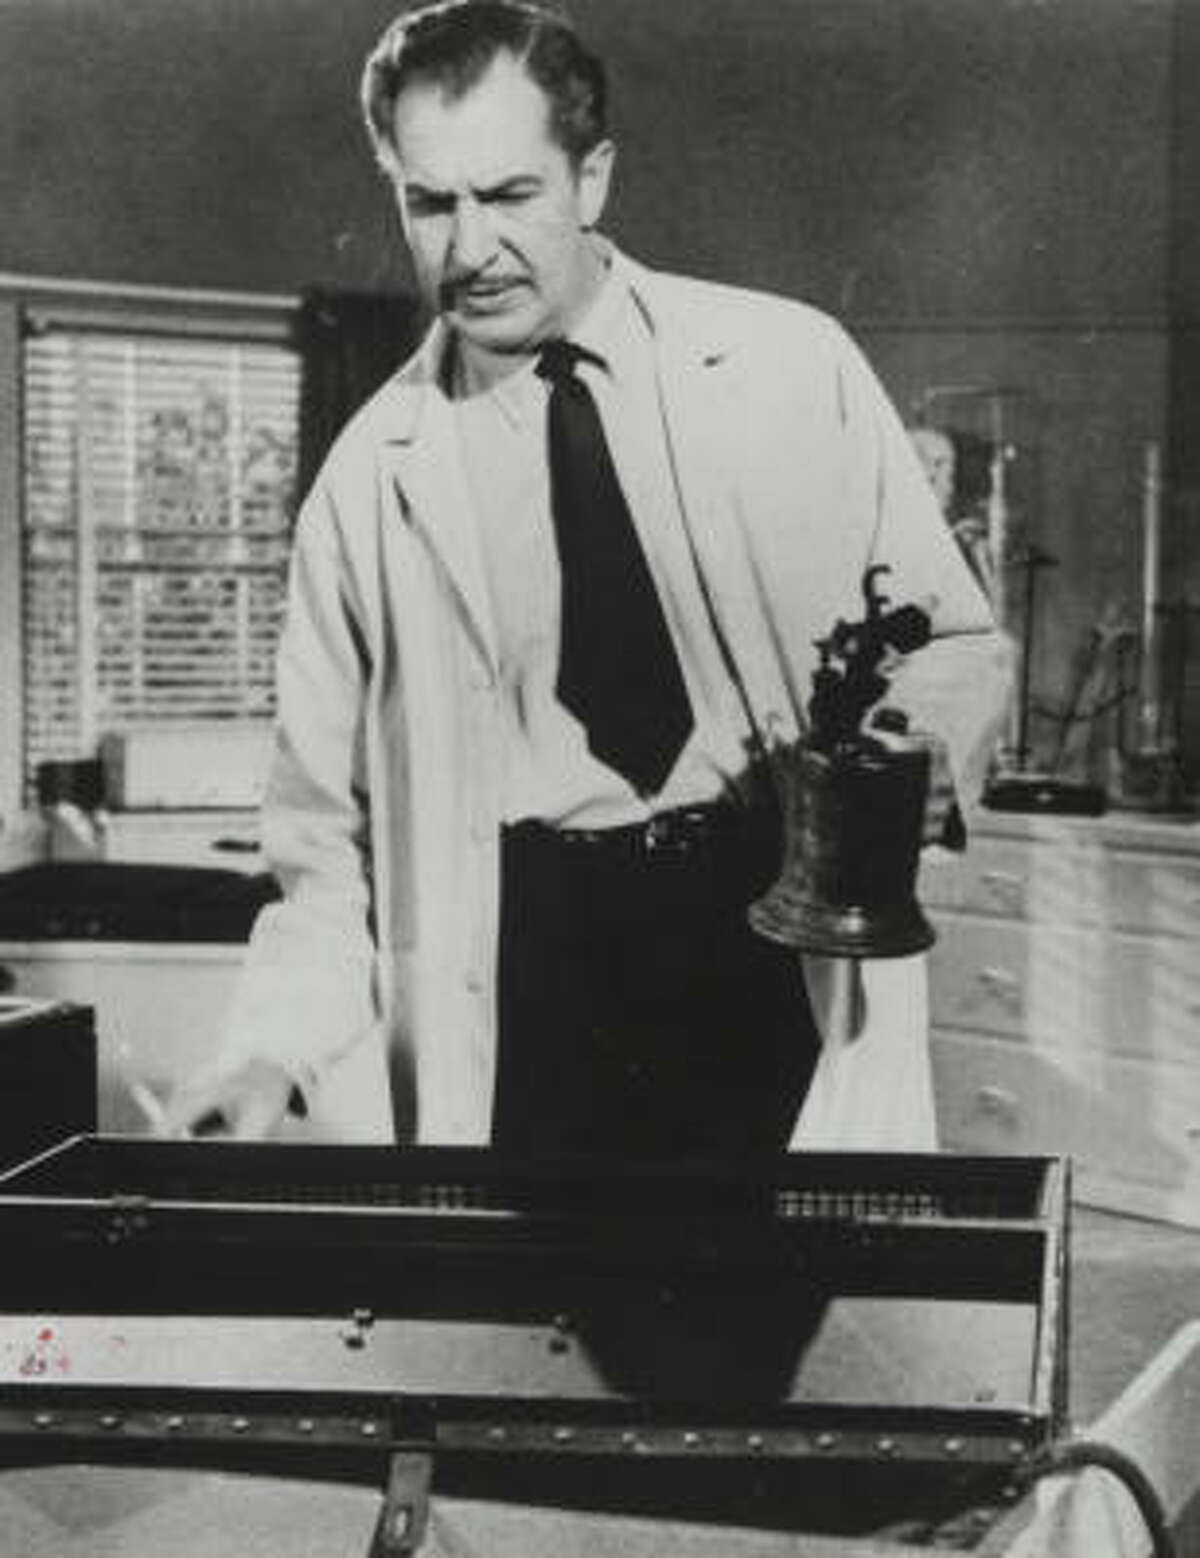 Dr. Warren Chapin (Vincent Price) in The Tingler: Sometime blurts: "Scream for your lives!"